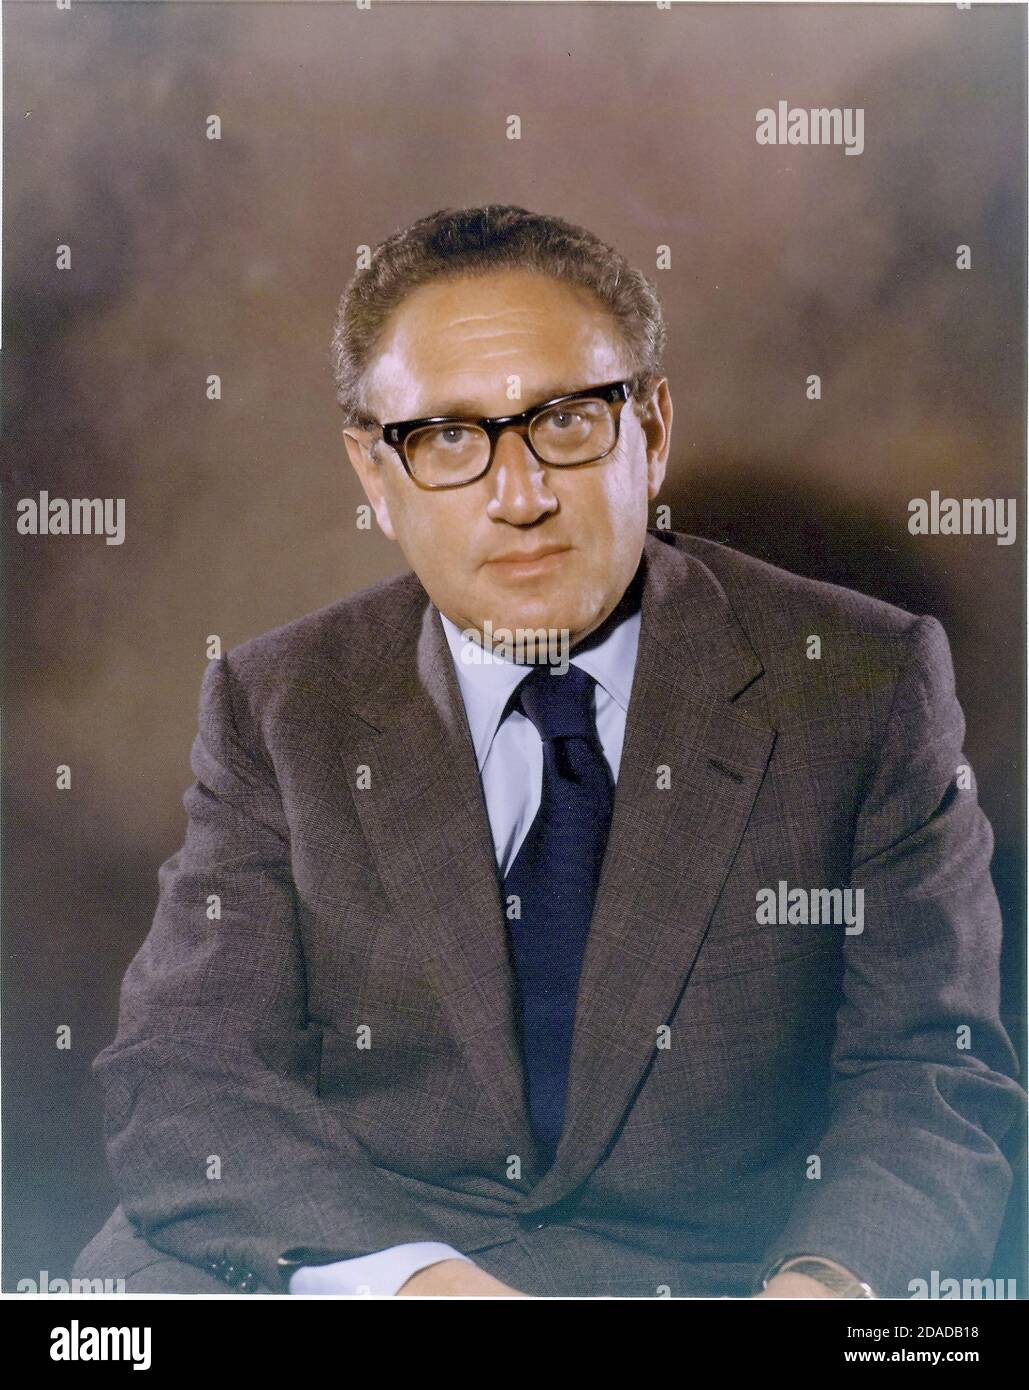 Washington, DC - January 26, 1973 -- Portrait of Doctor Henry A. Kissinger taken in Washington, DC on January 26, 1973. At the time, Kissinger was National Security Advisor to United States President Richard M. Nixon.Credit: White House via CNP | usage worldwide Stock Photo